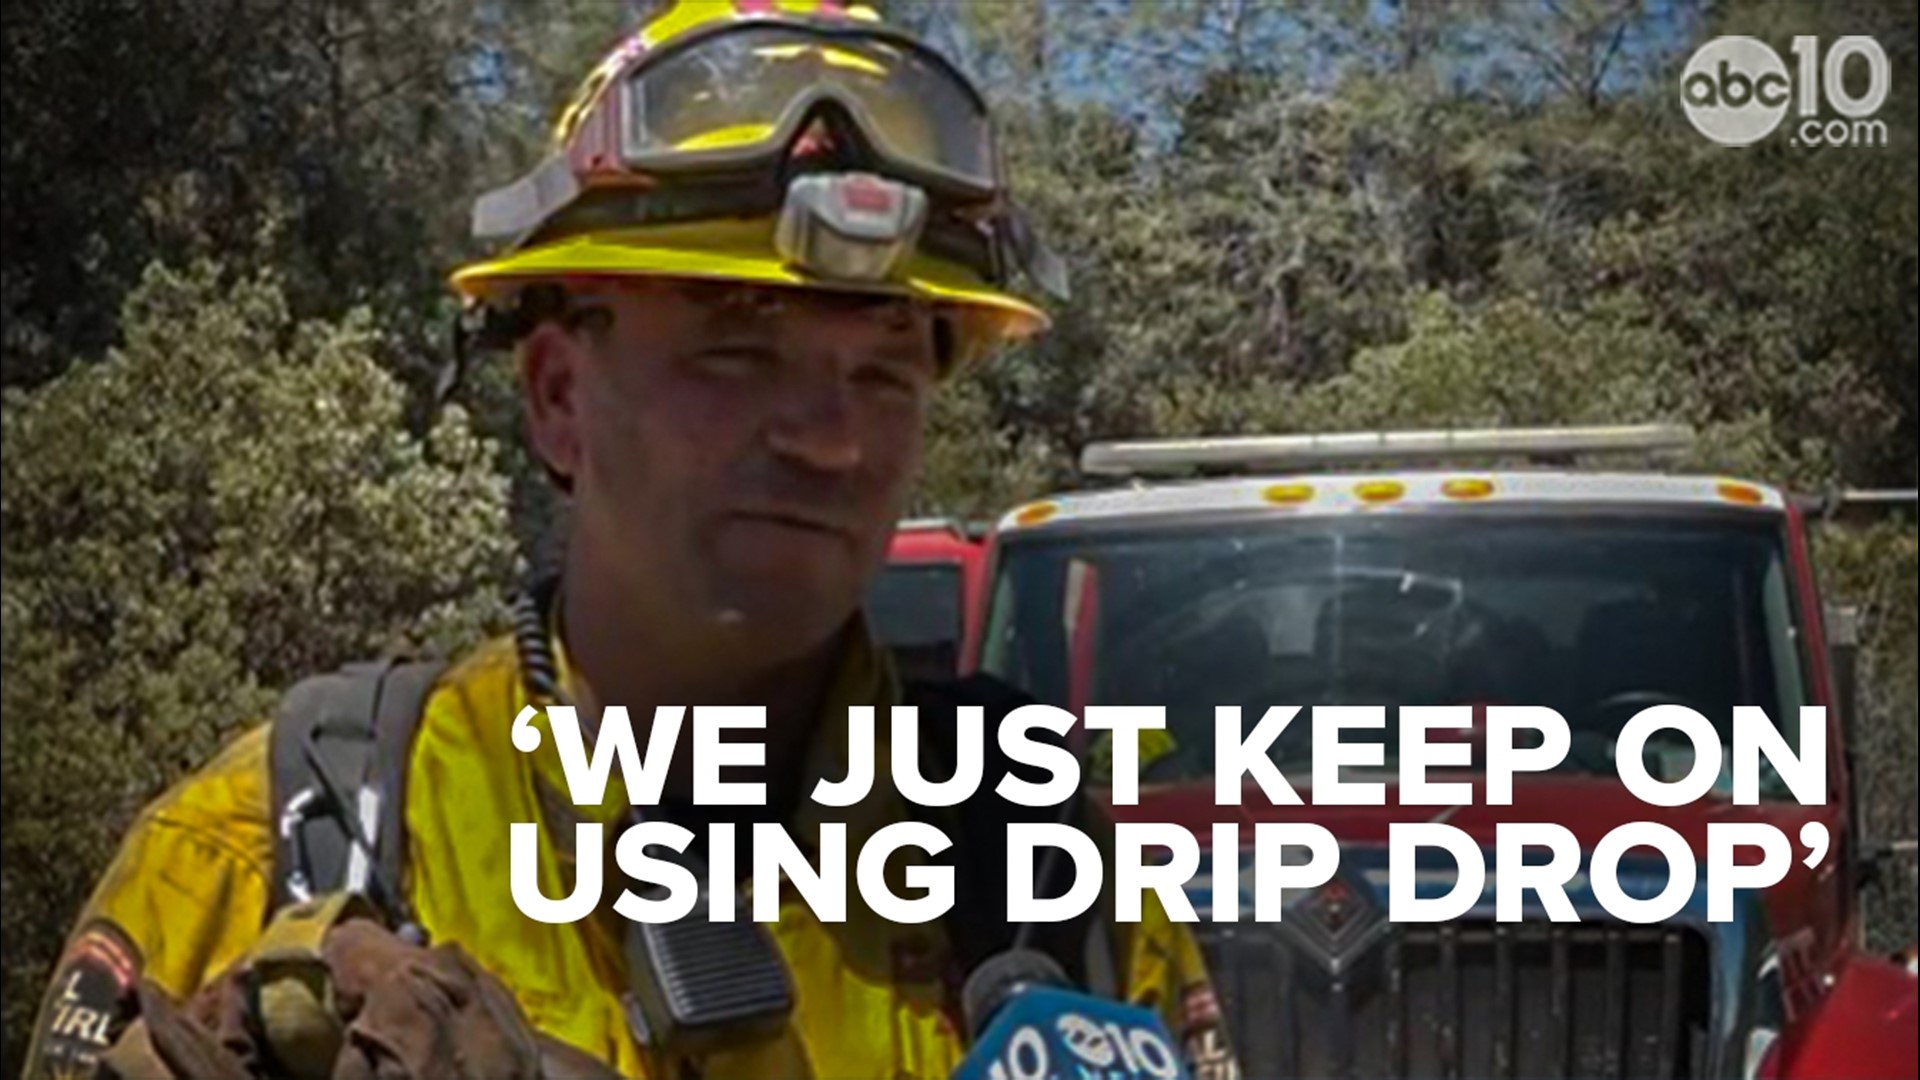 Firefighters were in a Butte County neighborhood Friday mopping up hot spots just a few hundred feet away from a street filled with homes.